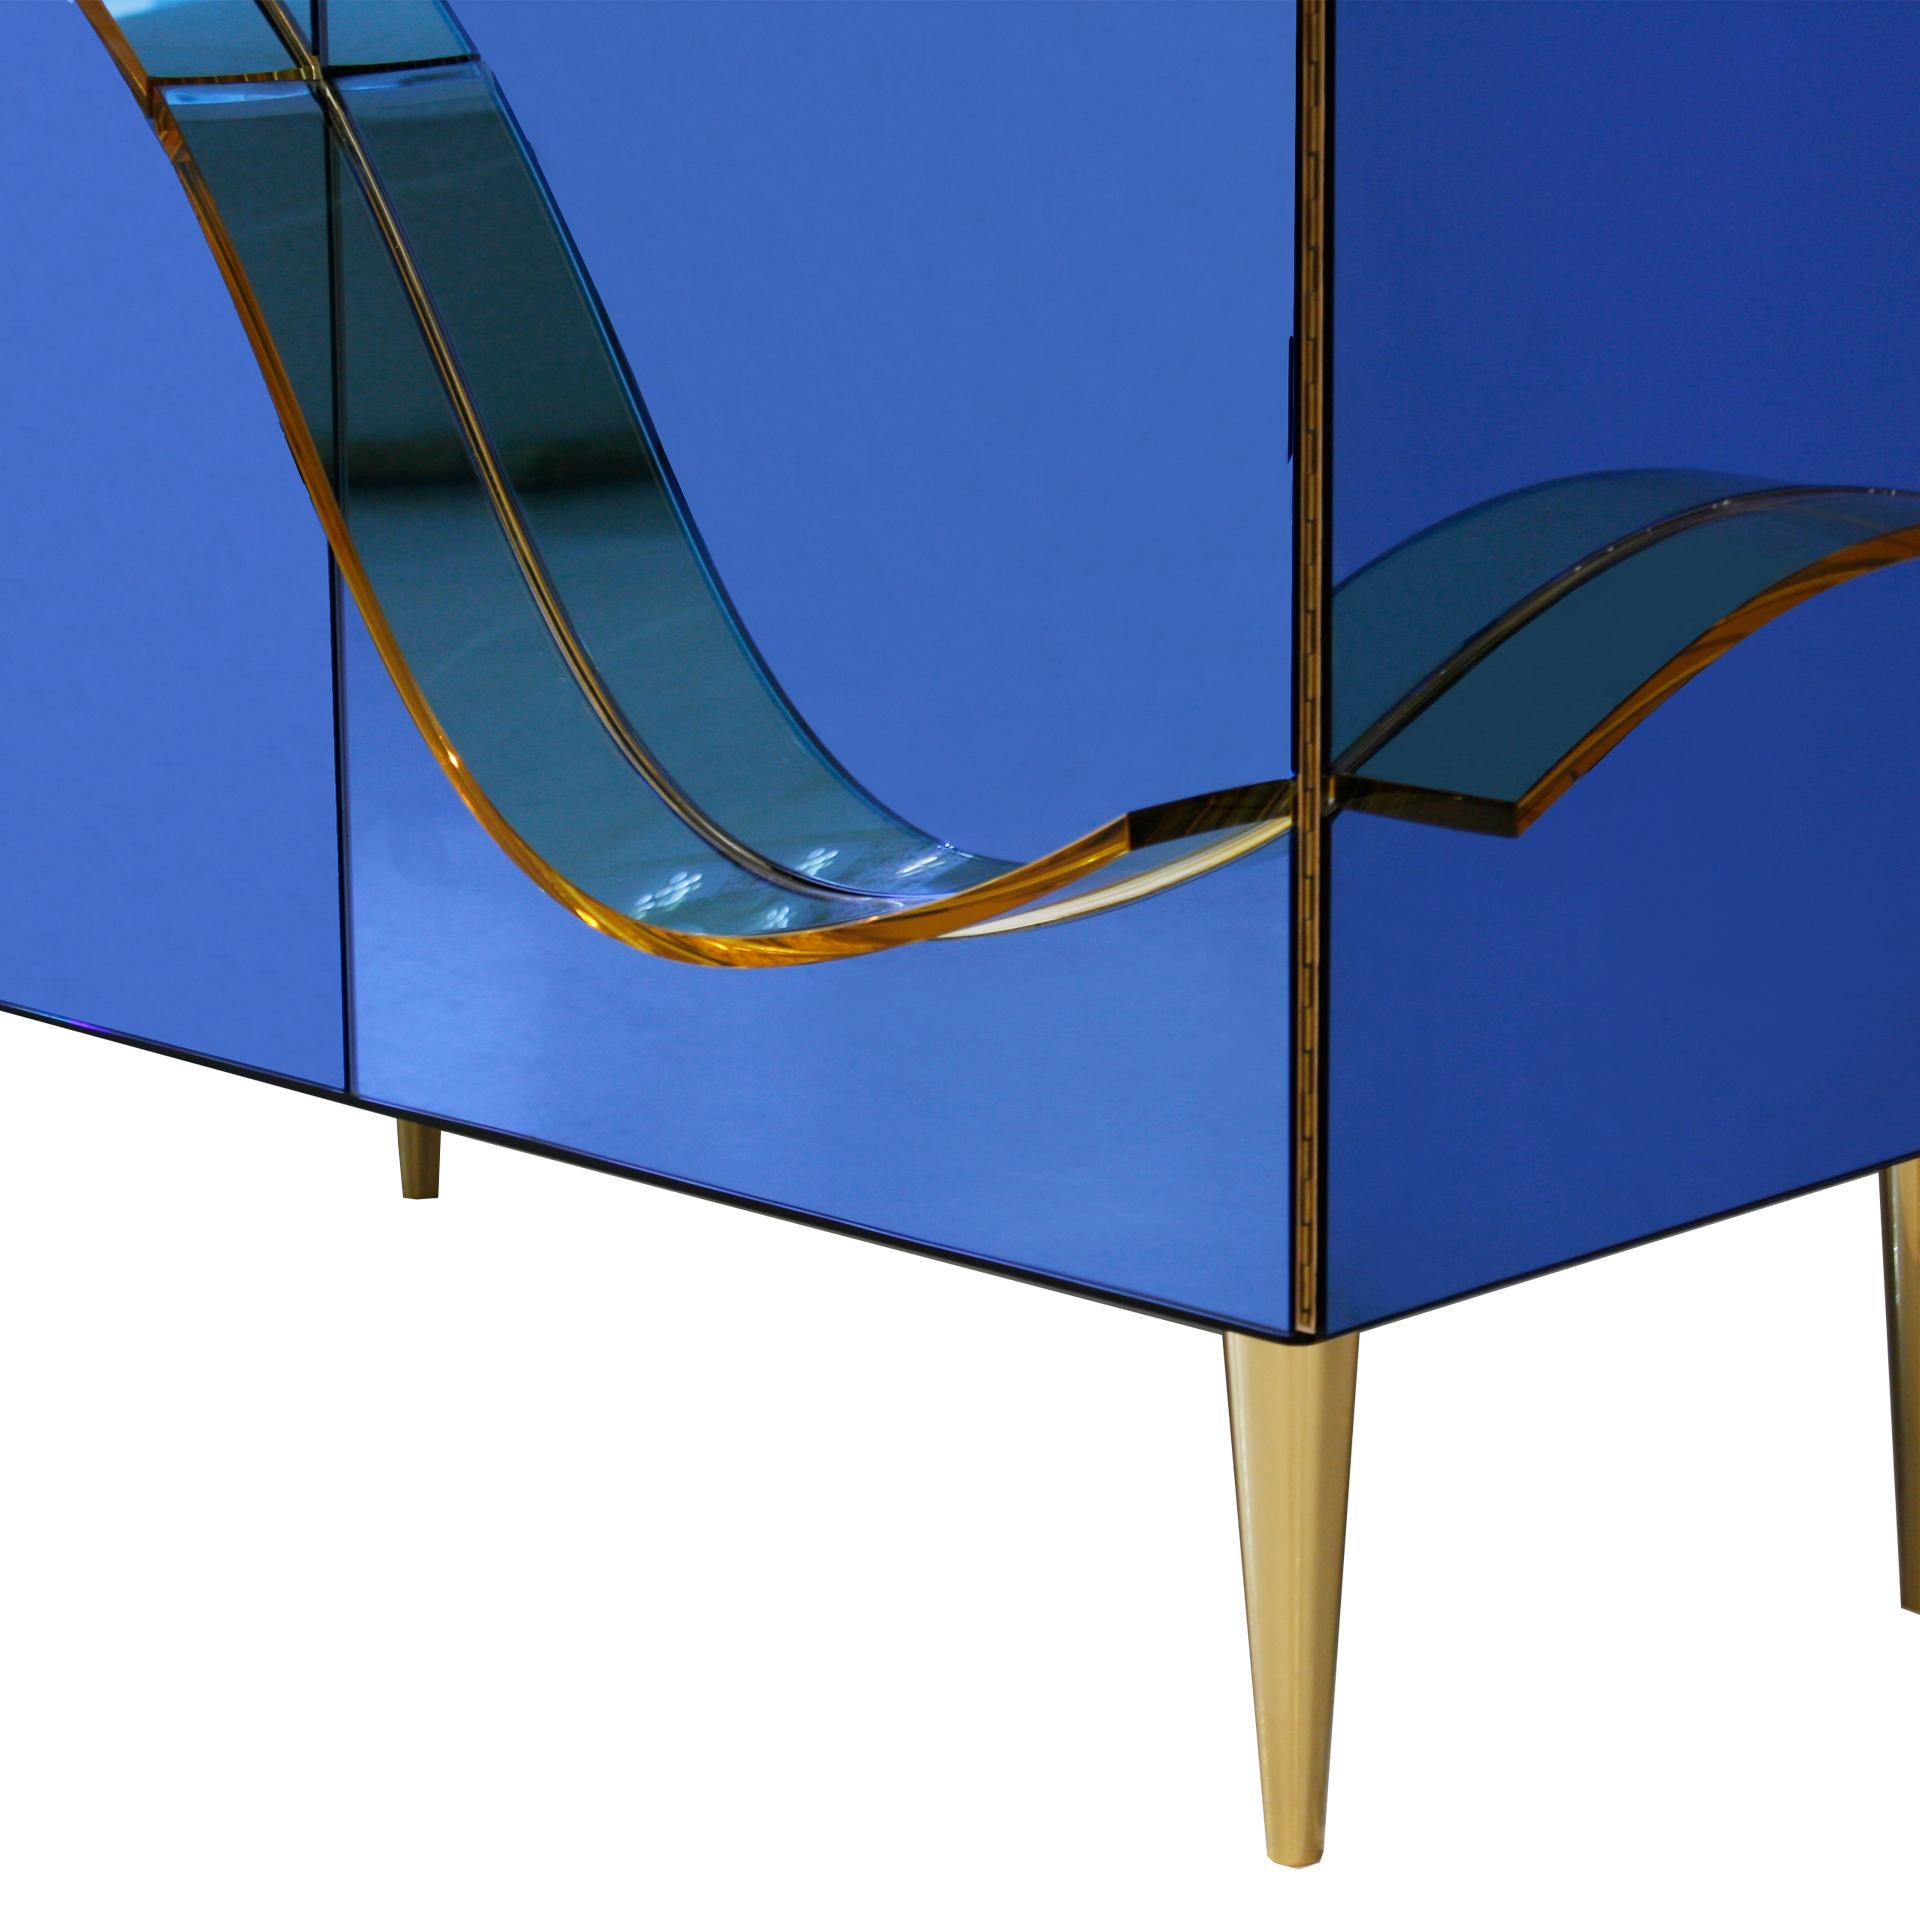 Sideboard made with solid birch wood structure, covered in blue glass and mirror. Decorative Murano glass applications on the surface, carved and molded by hand.

Every item LA Studio offers is checked by our team of 10 craftsmen in our in-house